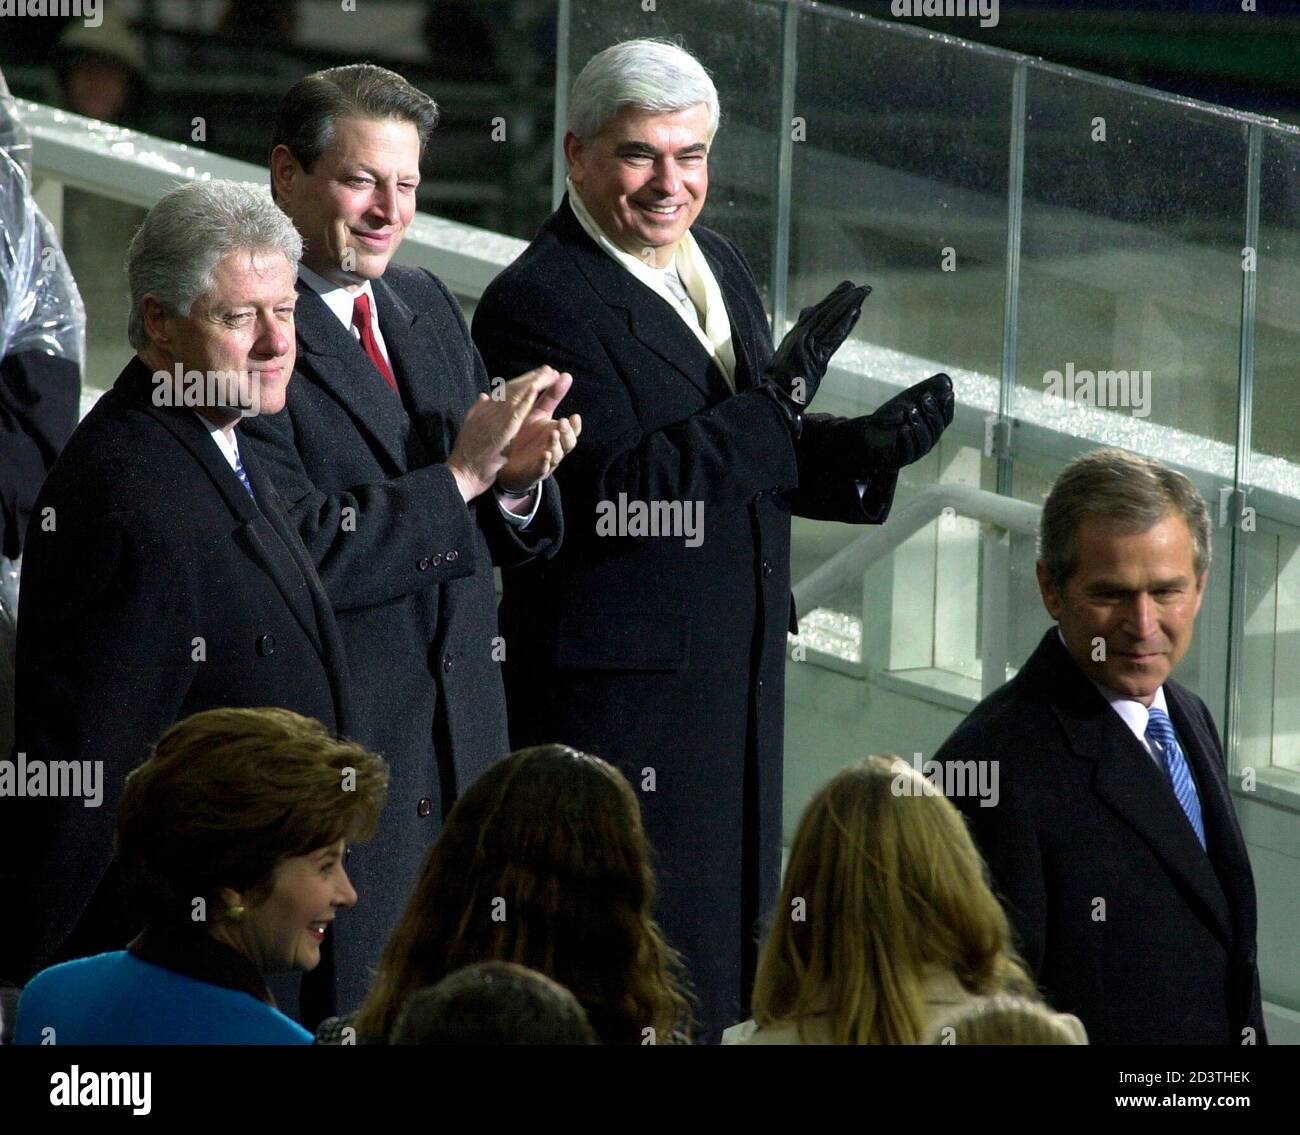 us-president-bill-clinton-l-vice-president-al-gore-2l-and-christopher-dodd-d-ct-watch-as-george-w-bush-r-arrives-to-attend-the-us-presidential-inauguration-at-the-us-capitol-january-20-2001-bush-took-the-oath-of-office-on-saturday-as-the-43rd-president-of-the-united-states-and-pledged-he-would-work-to-build-a-single-nation-of-justice-and-opportunity-jpme-2D3THEK.jpg